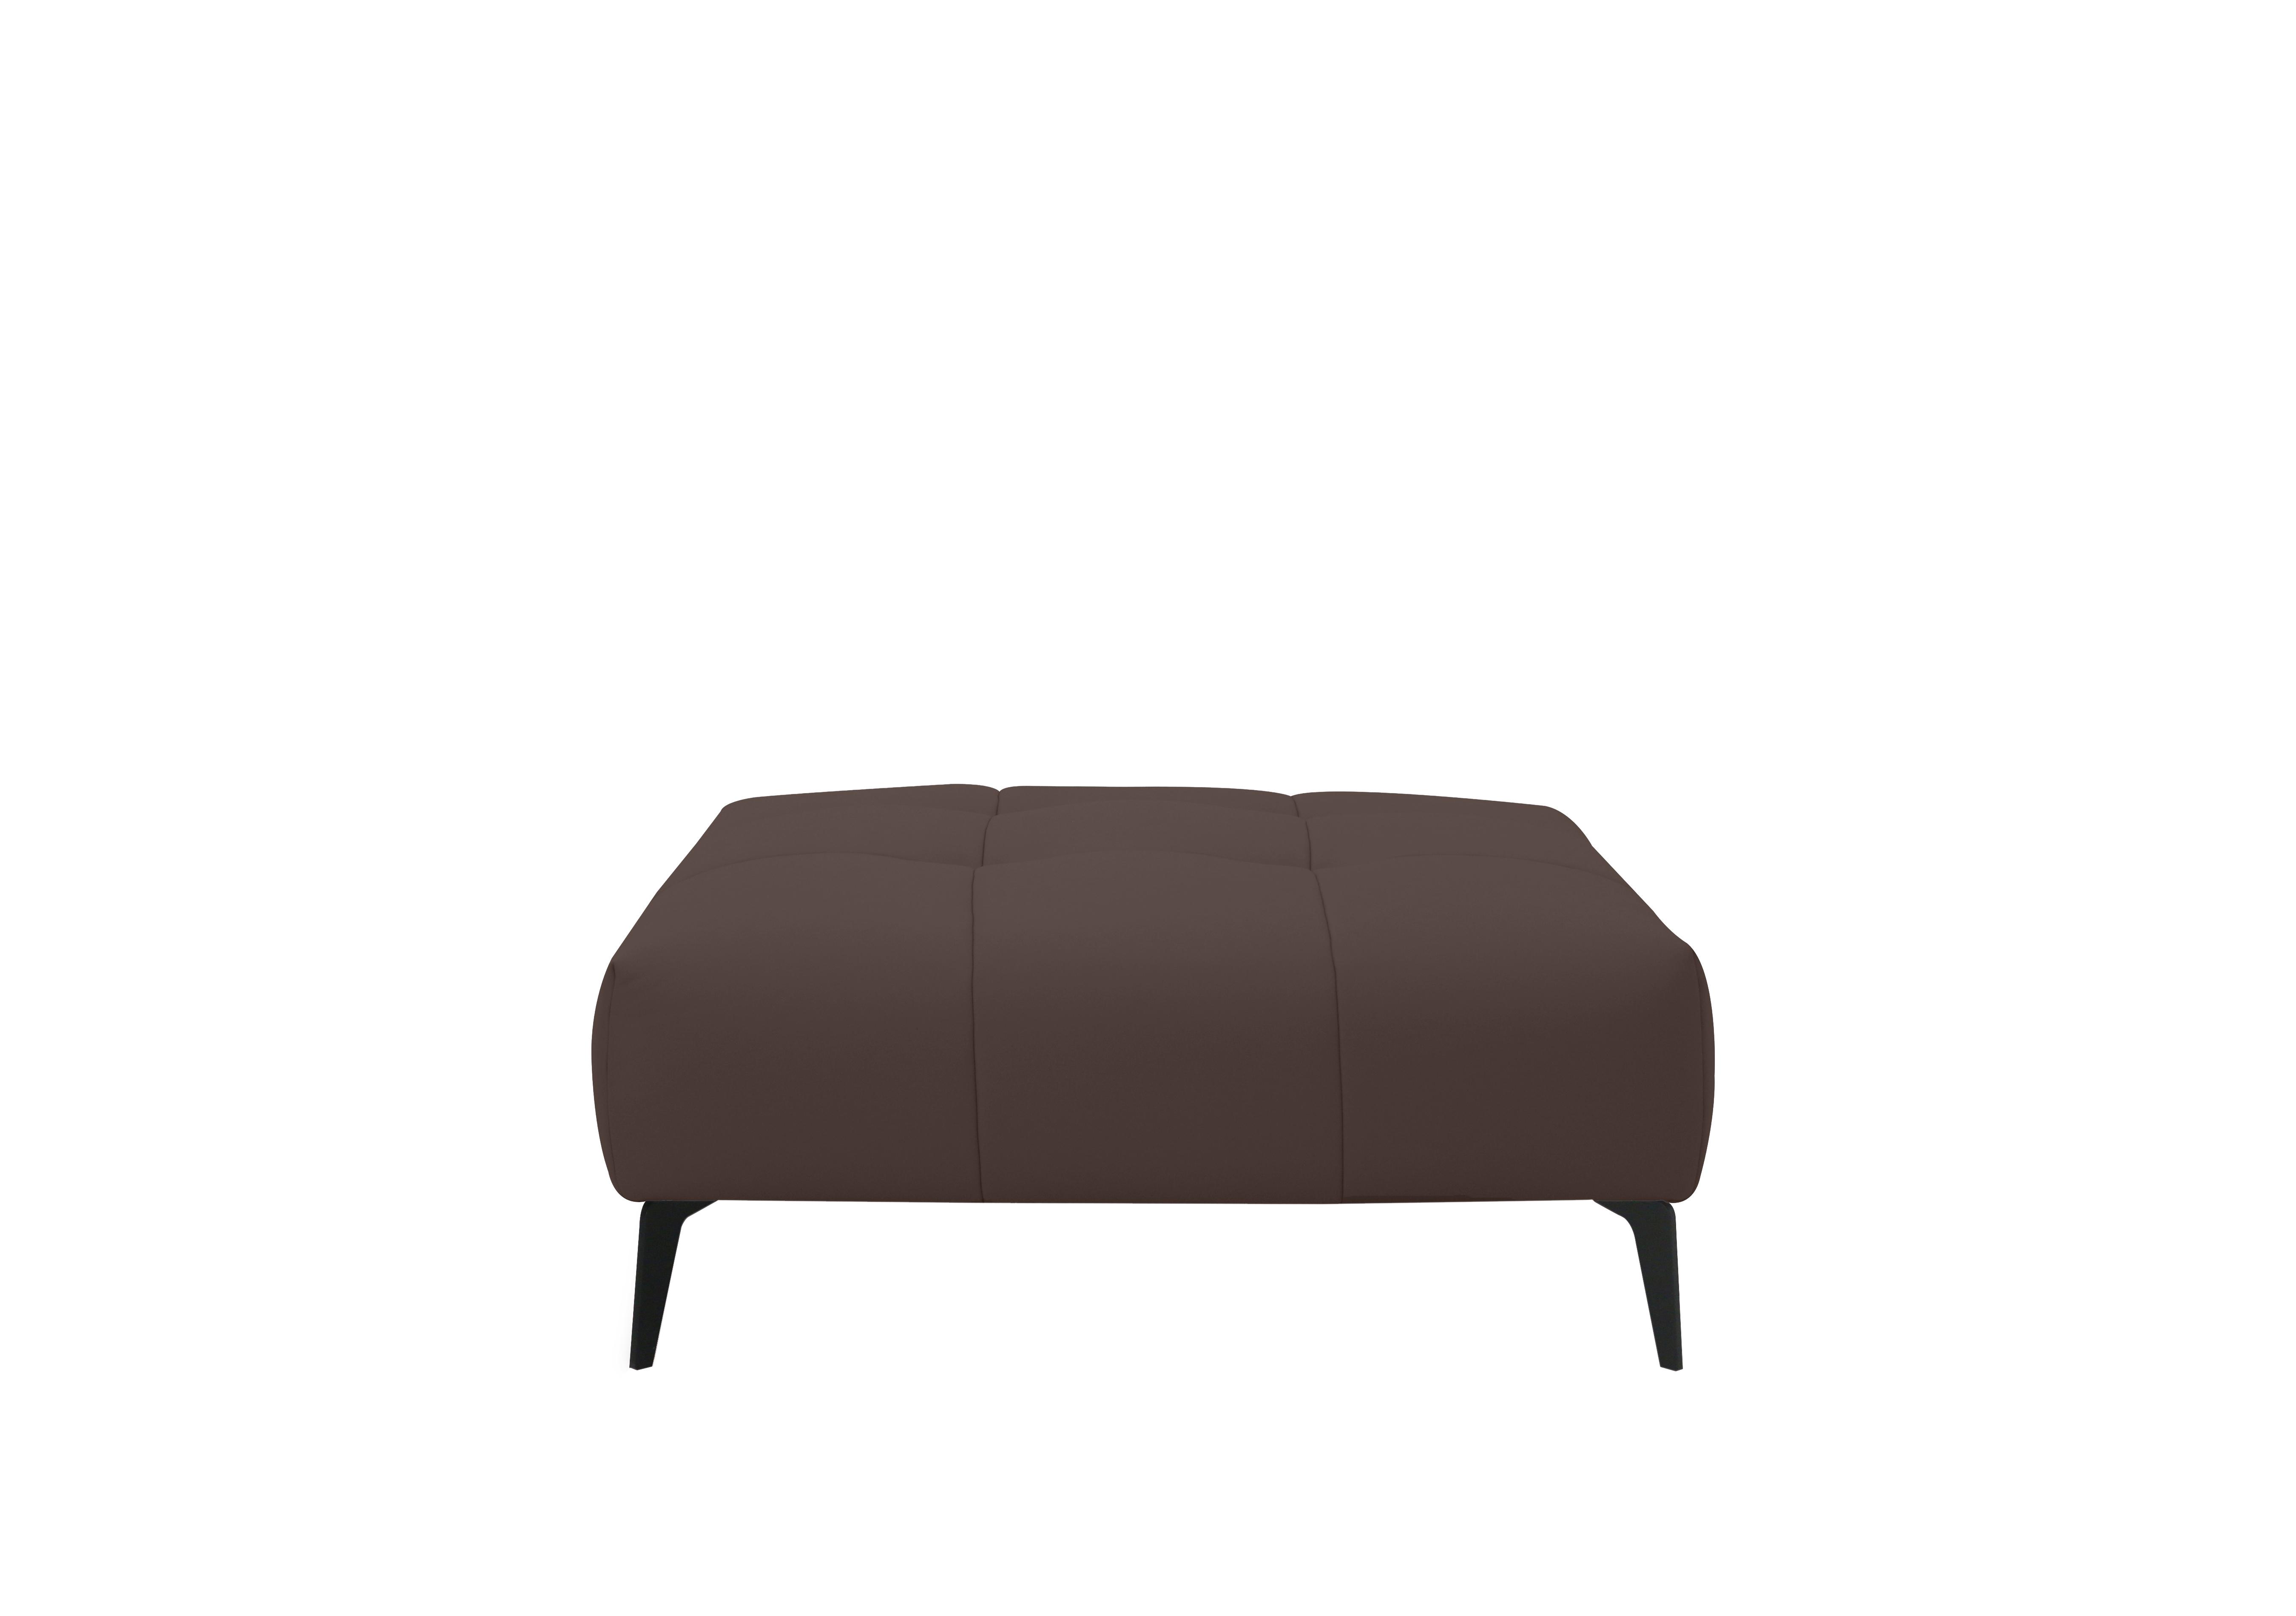 Lawson Leather Footstool in Nn-512e Cacao Brown on Furniture Village